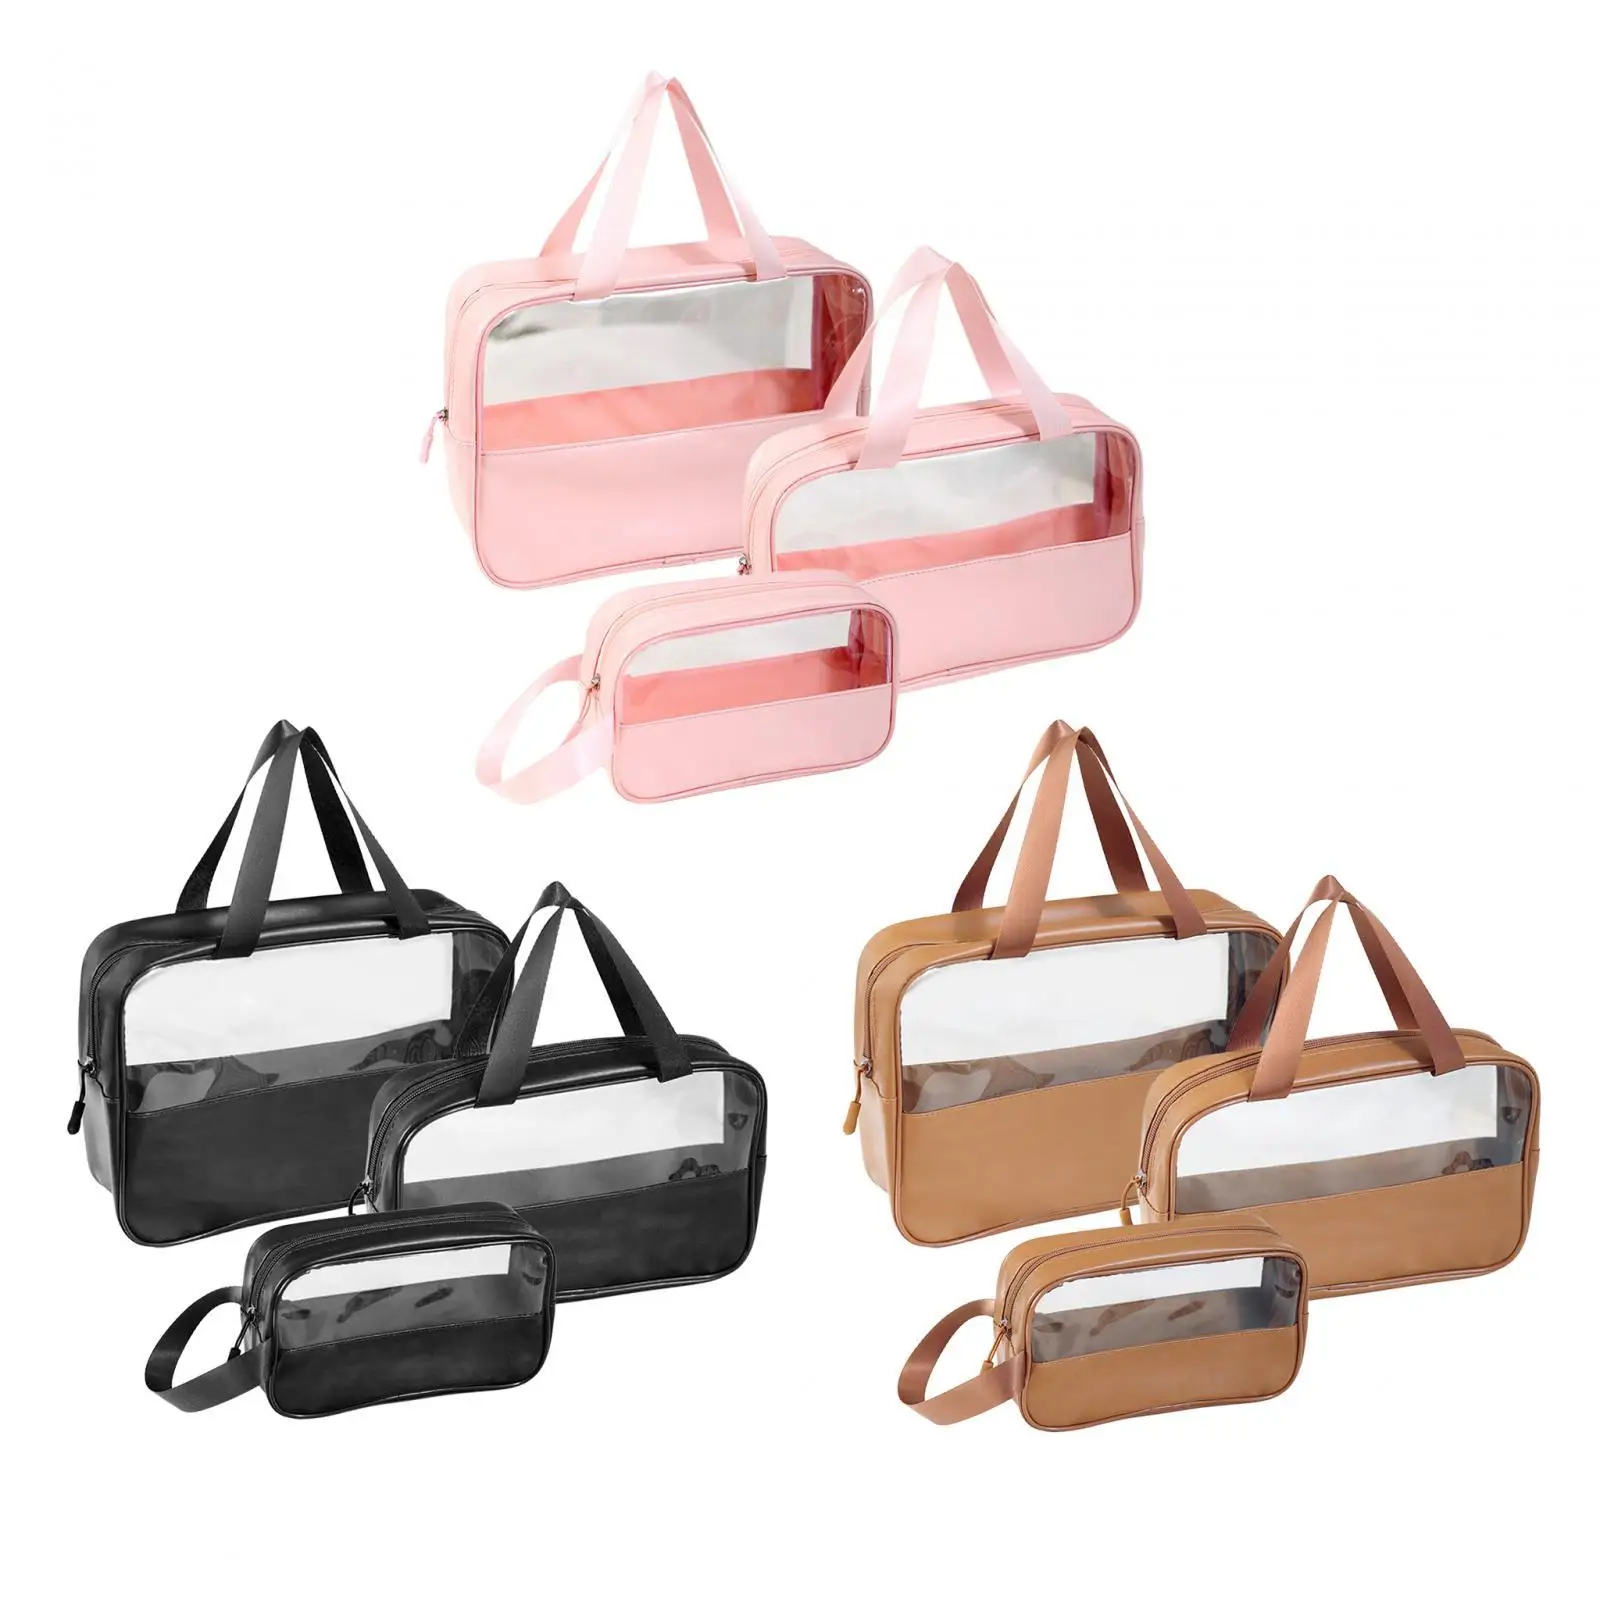 3x Clear Makeup Bag Cosmetic Bag Multifunction Waterproof with Zipper Cosmetic Organizer Storage Bag Pouch Portable Wash Bag